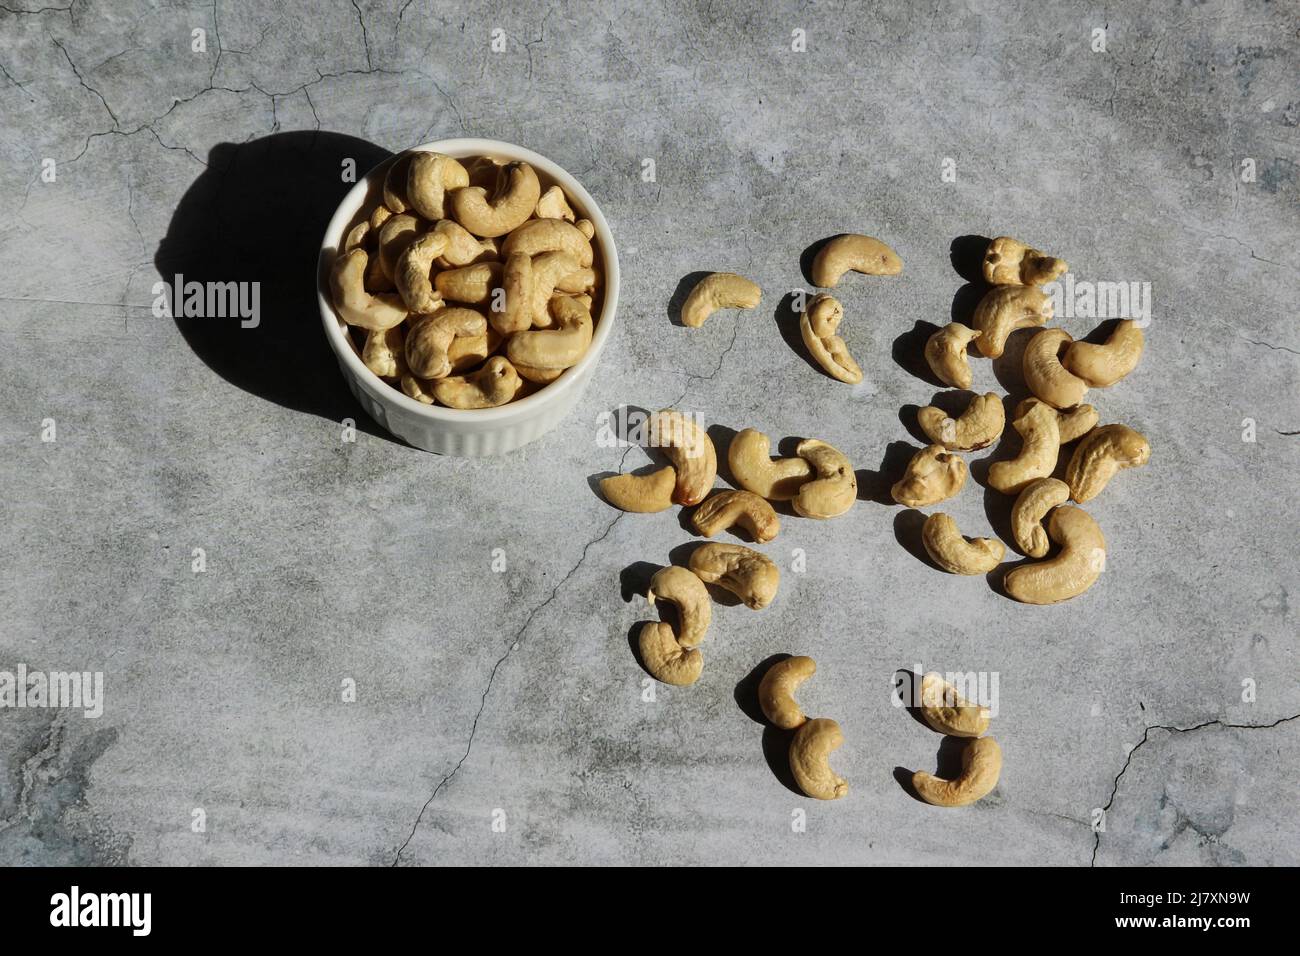 Cashew nuts on the cement background. Top view. Stock Photo